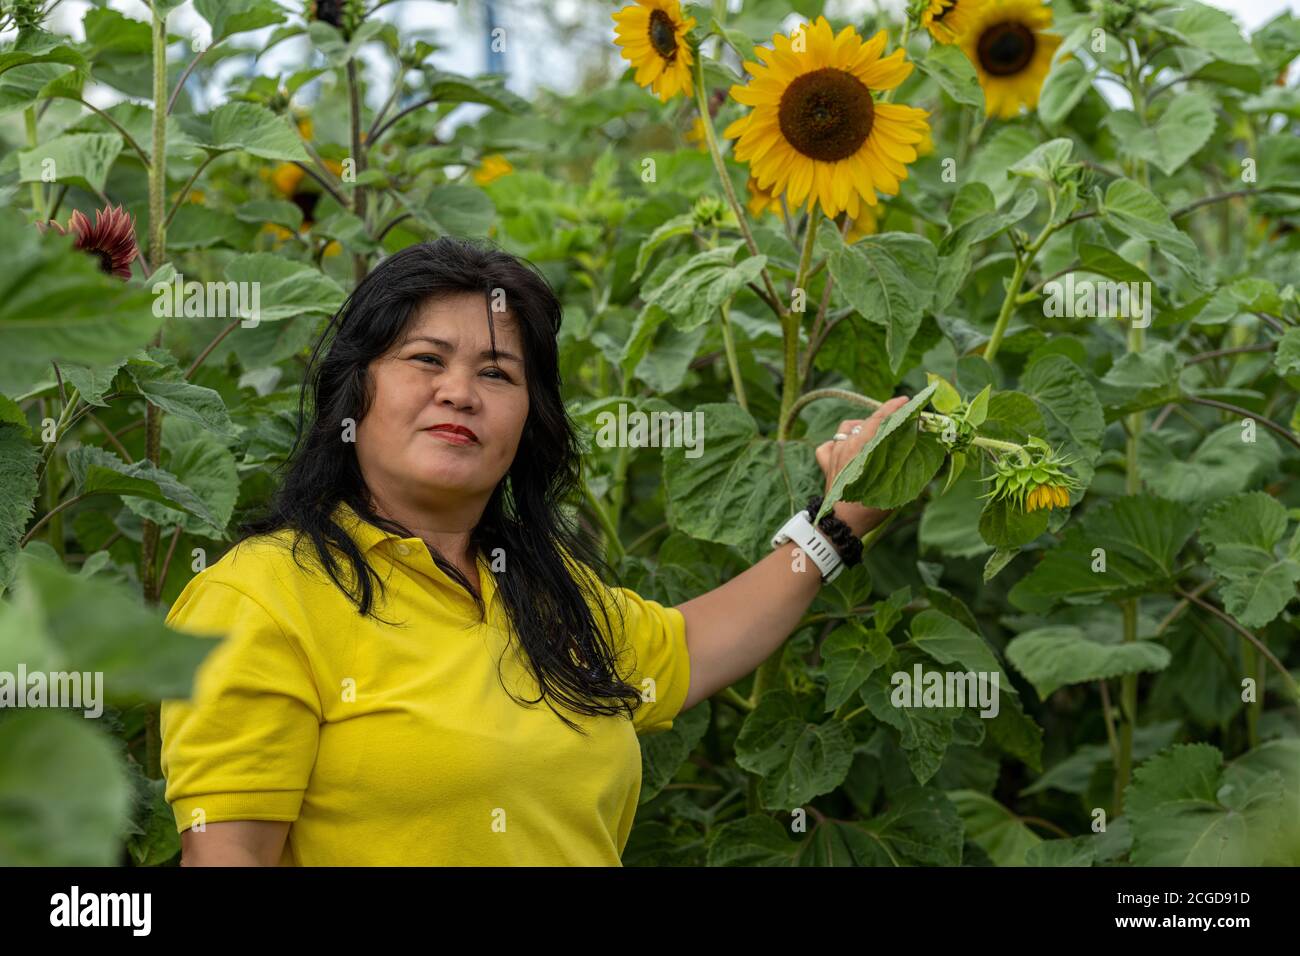 A middle-aged Asian woman, in her 50s, in a sunflower field Stock Photo